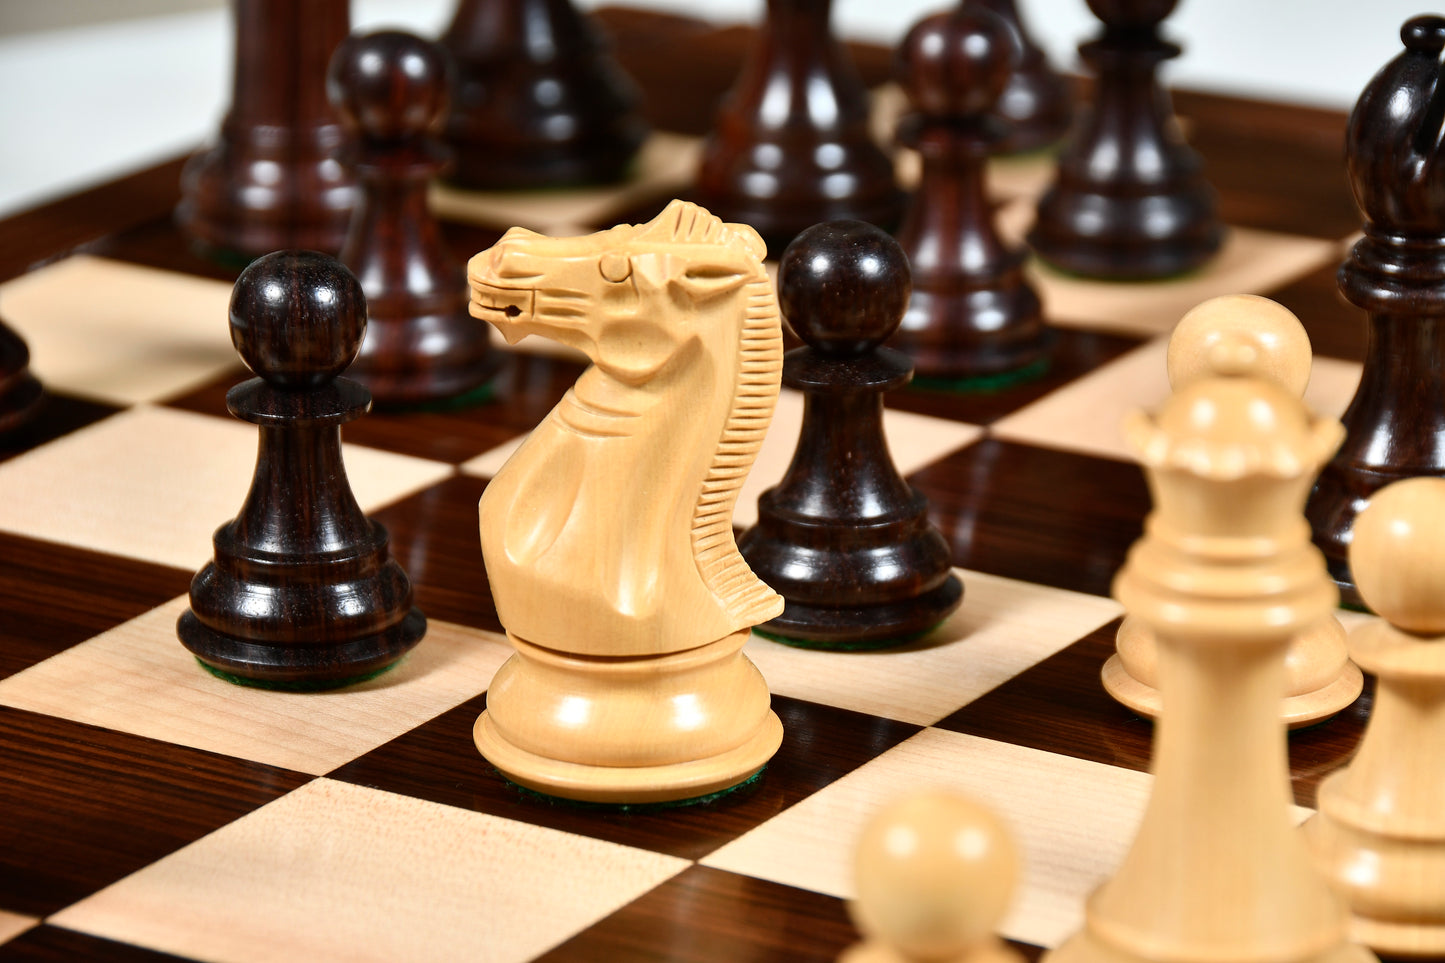 The Honour of Staunton (HOS) Series Weighted Chess Pieces in Rose wood & Box Wood - 4.0" King